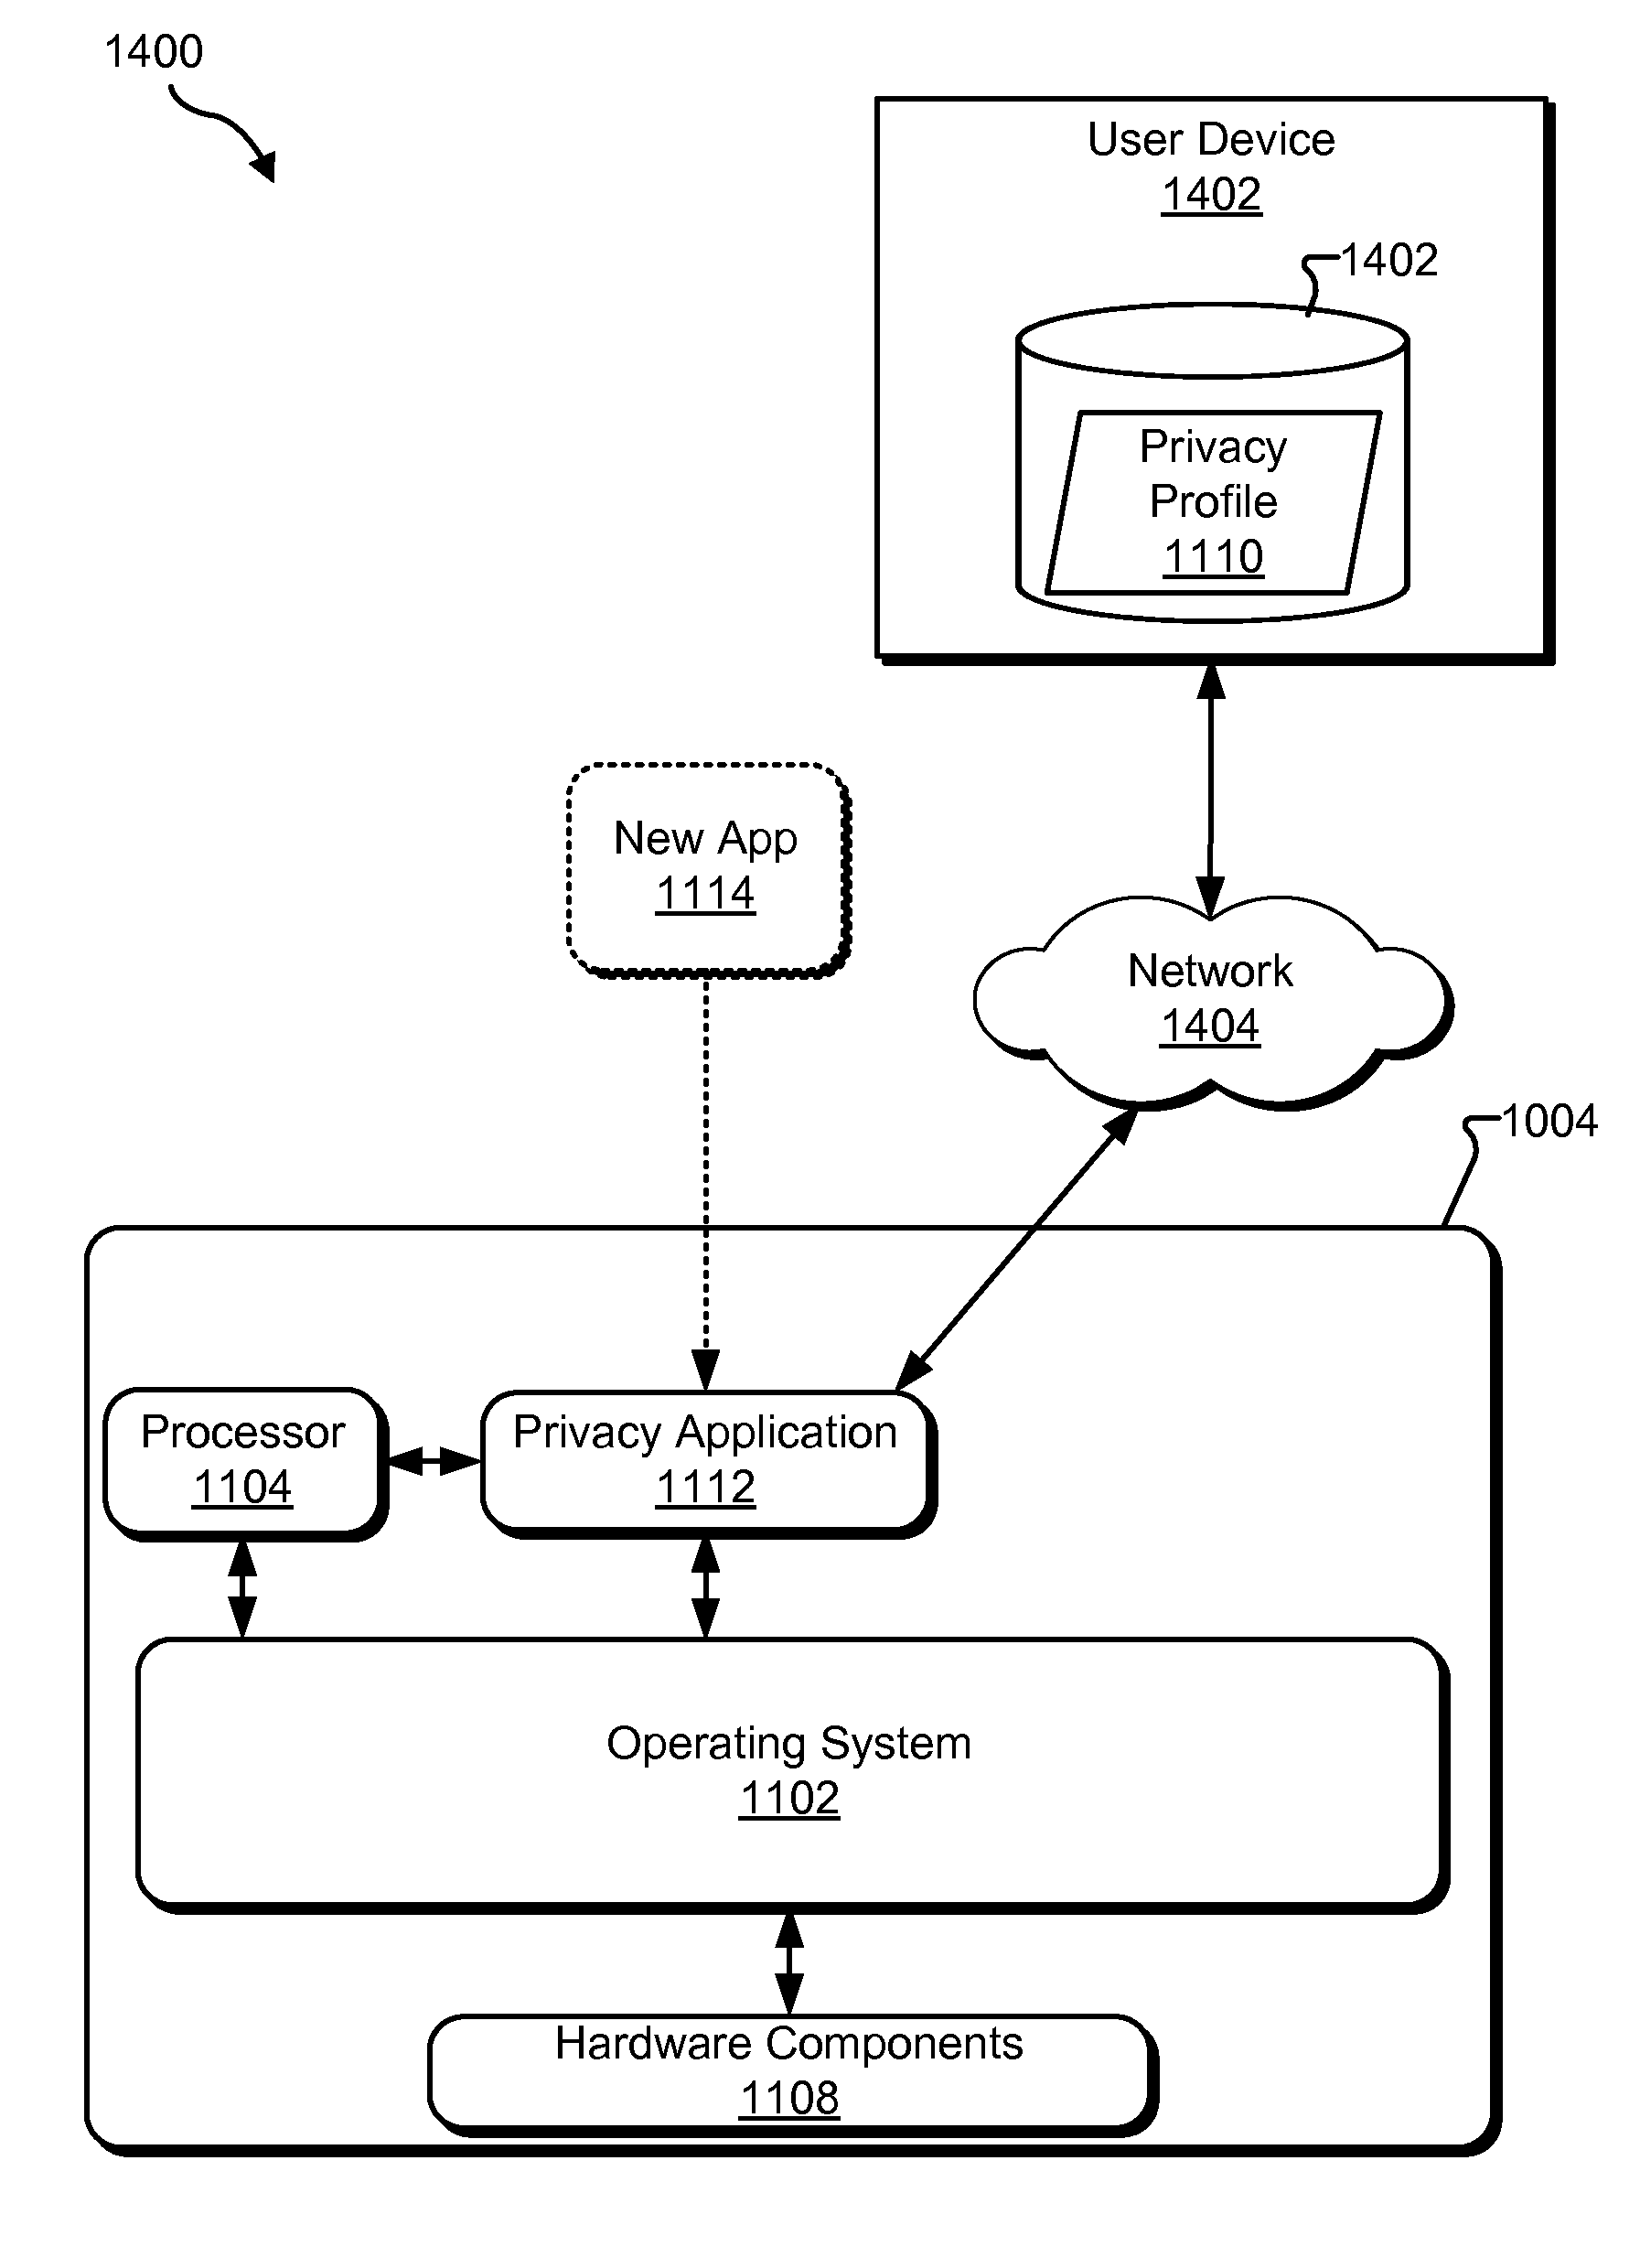 Methods and systems for providing a notification of a compliance level of an application with respect to a privacy profile associated with a user